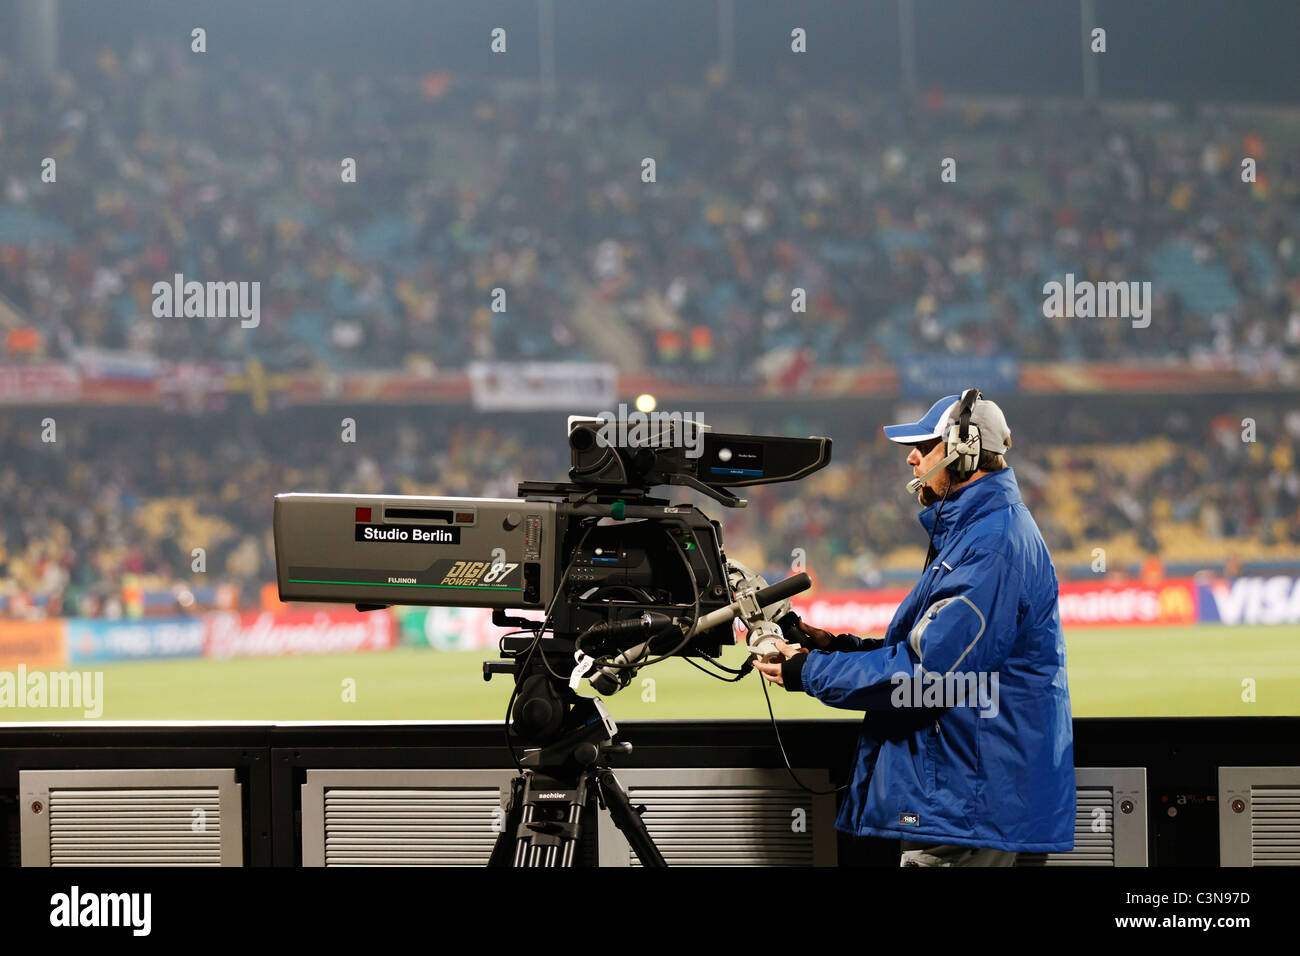 A television camera and operator positioned behind an end line at Royal Bafokeng Stadium in Rustenburg, South Africa - World Cup Stock Photo